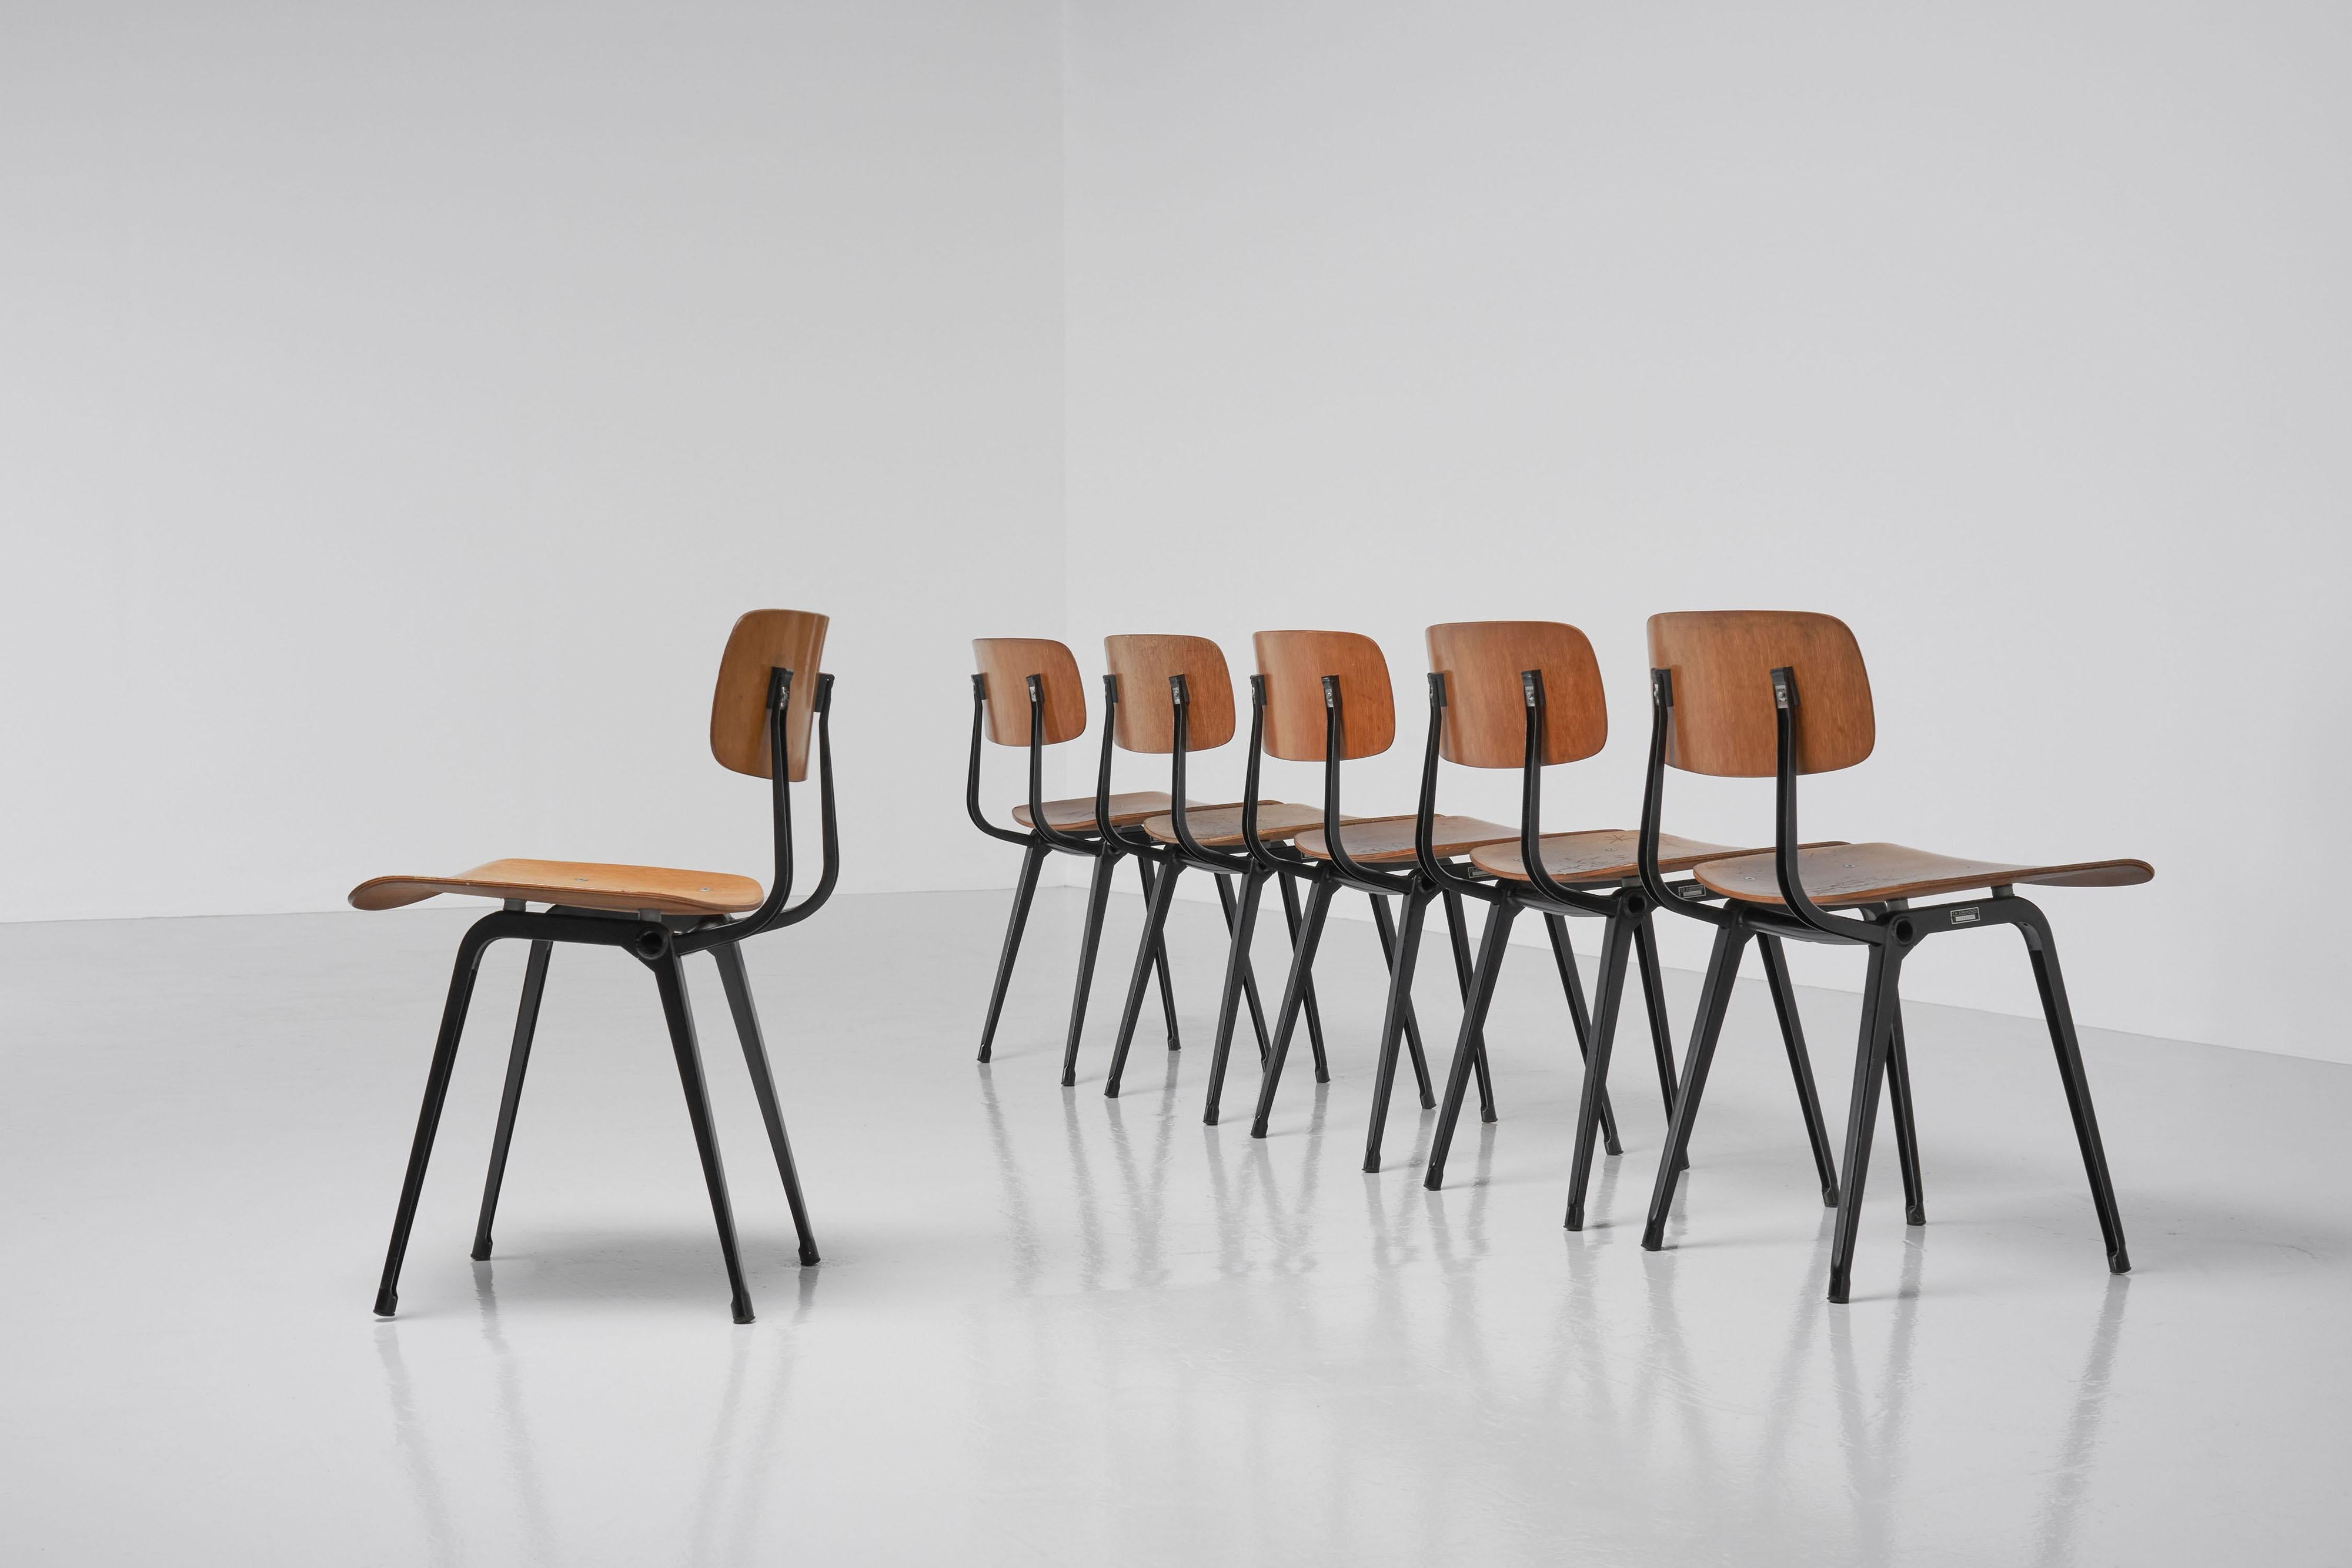 Super nice set of 6 original Revolt dining chairs designed by Friso Kramer and manufactured by Ahrend de Cirkel, The Netherlands 1953. Though the Revolt chair was already designed in 1953, the production started in 1958. These chairs are rare